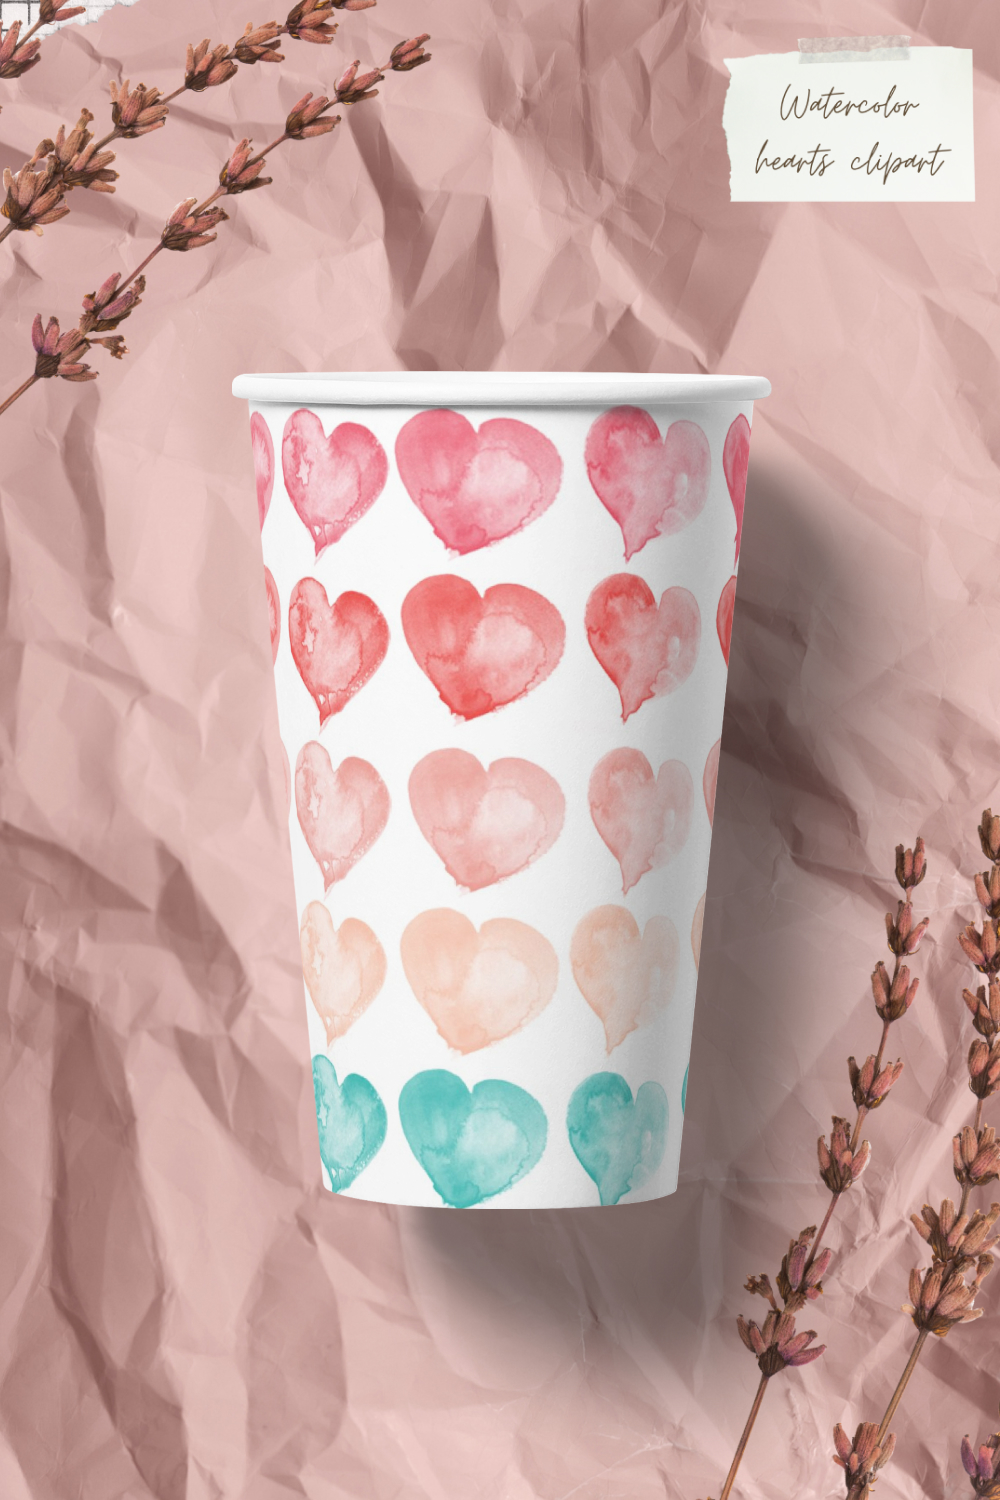 Watercolor hearts clipart images of pinterest.